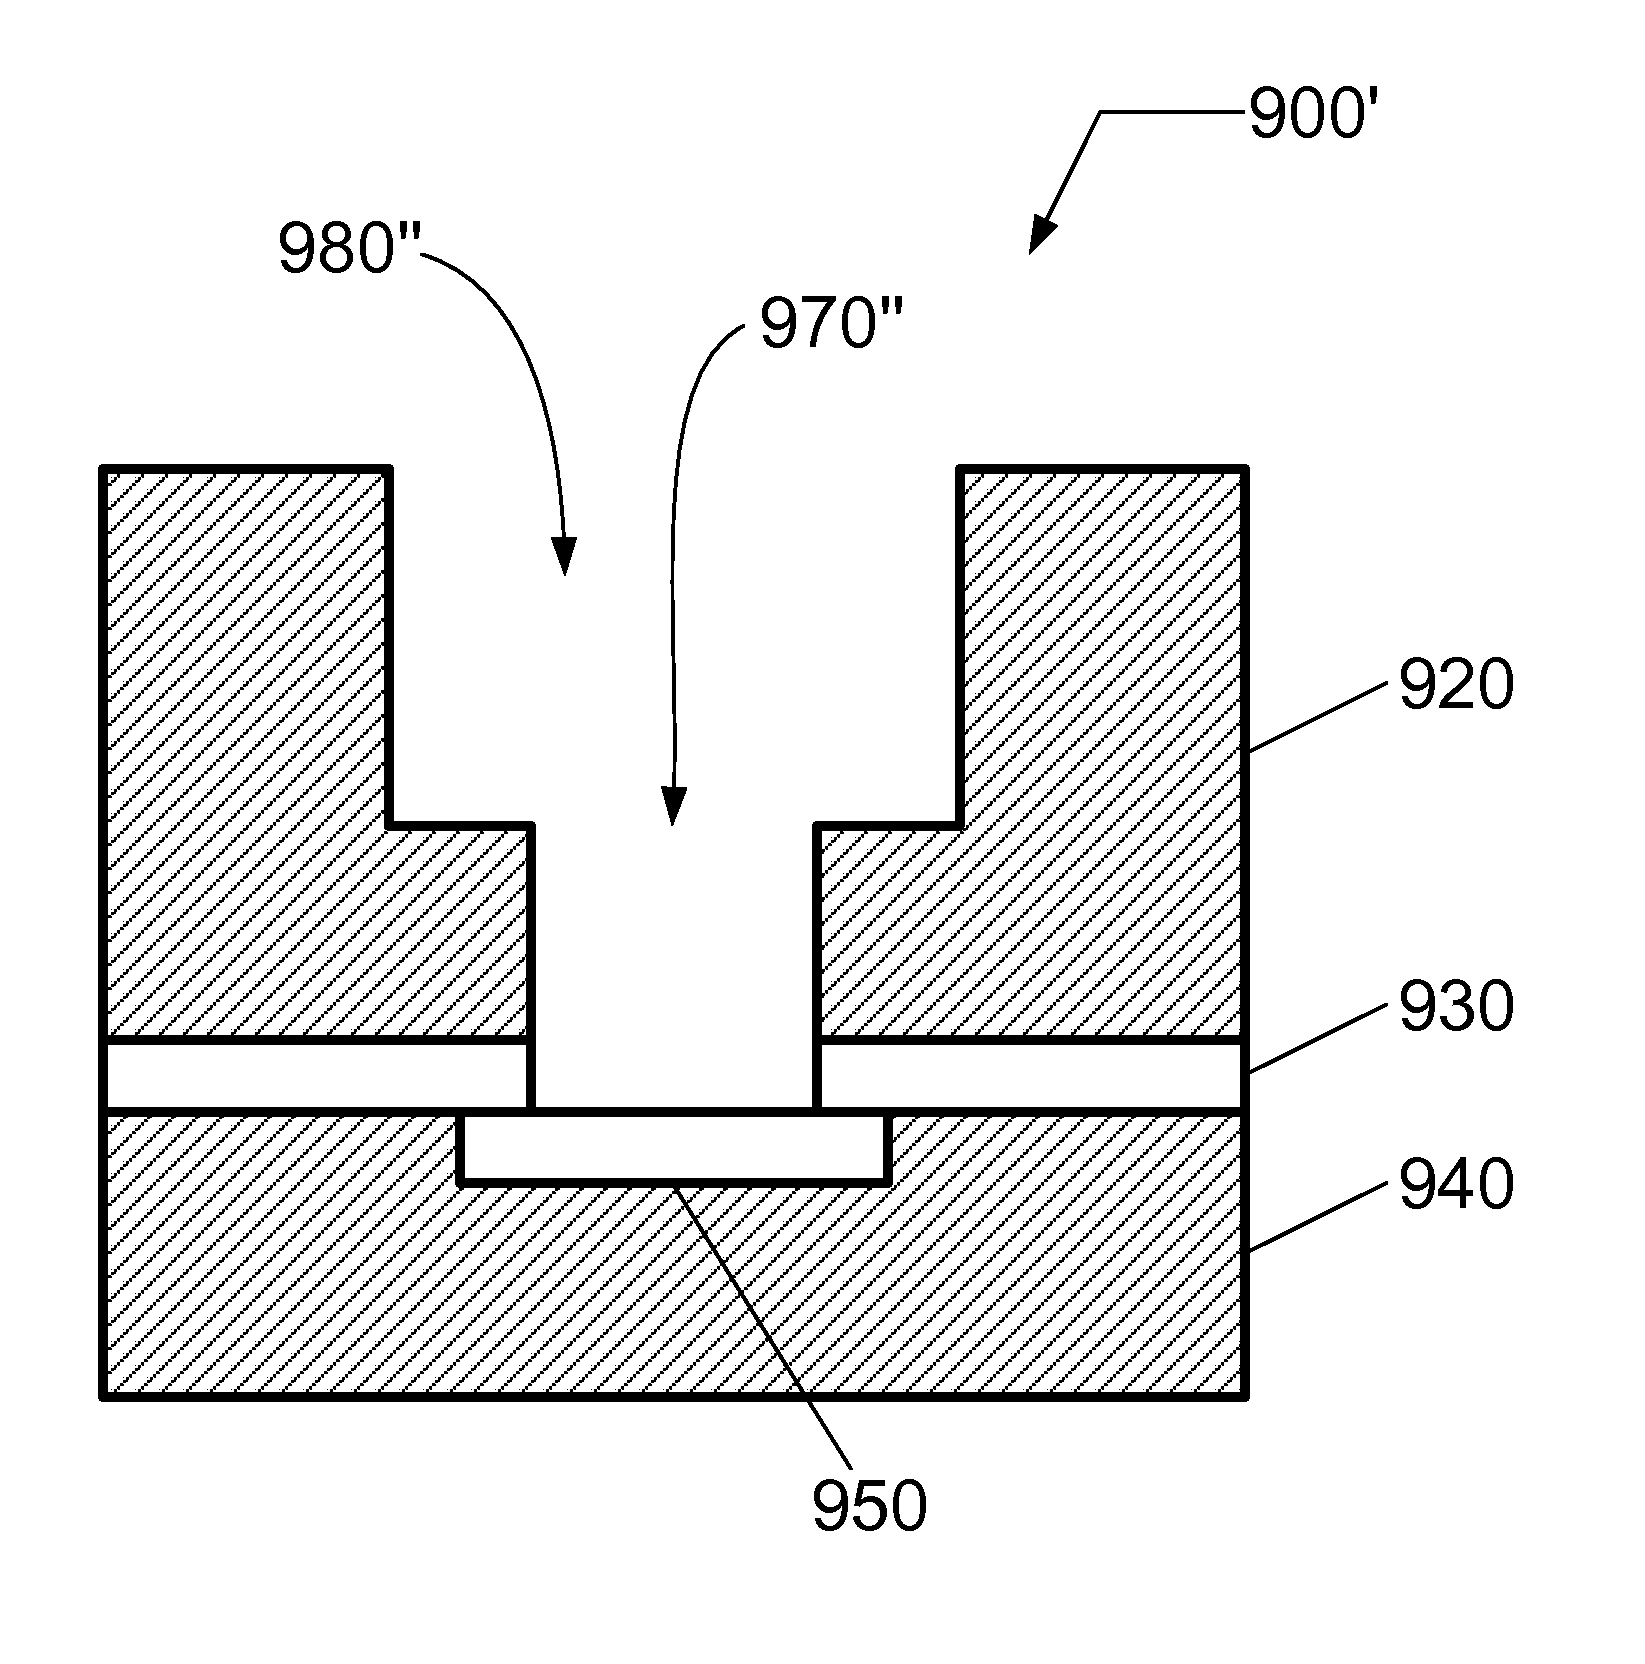 Method to remove capping layer of insulation dielectric in interconnect structures